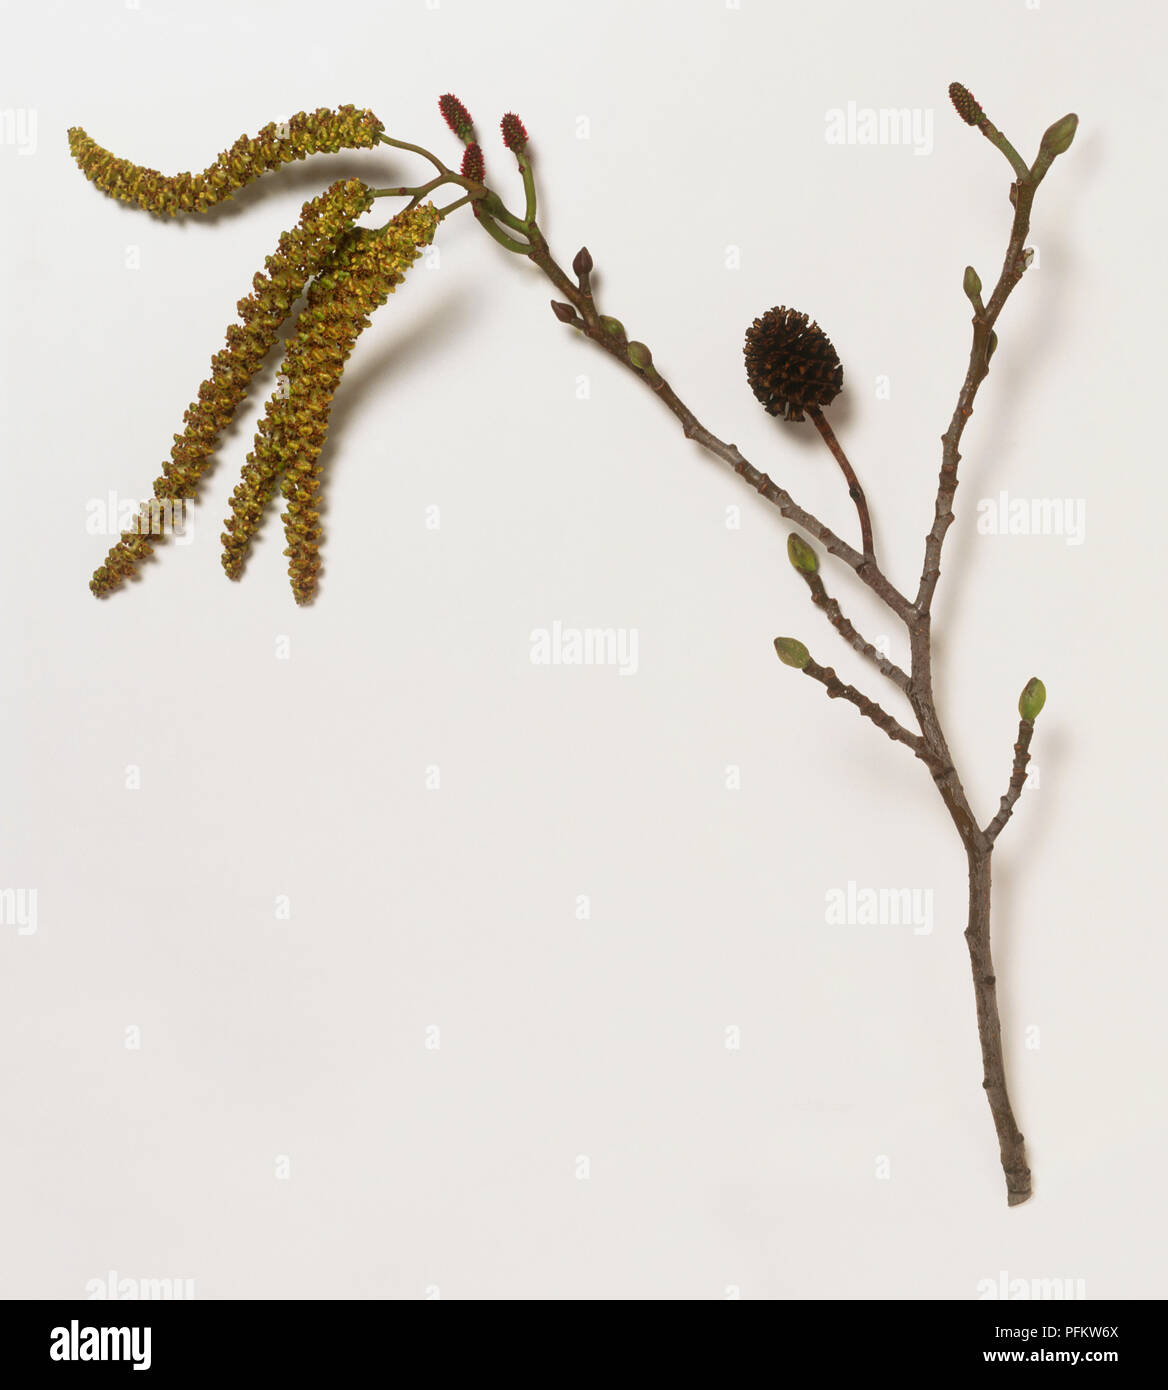 Branch from Alnus cordata (Italian alder) with yellow-brown male catkins, small, female catkins, and a single, brown fruit Stock Photo